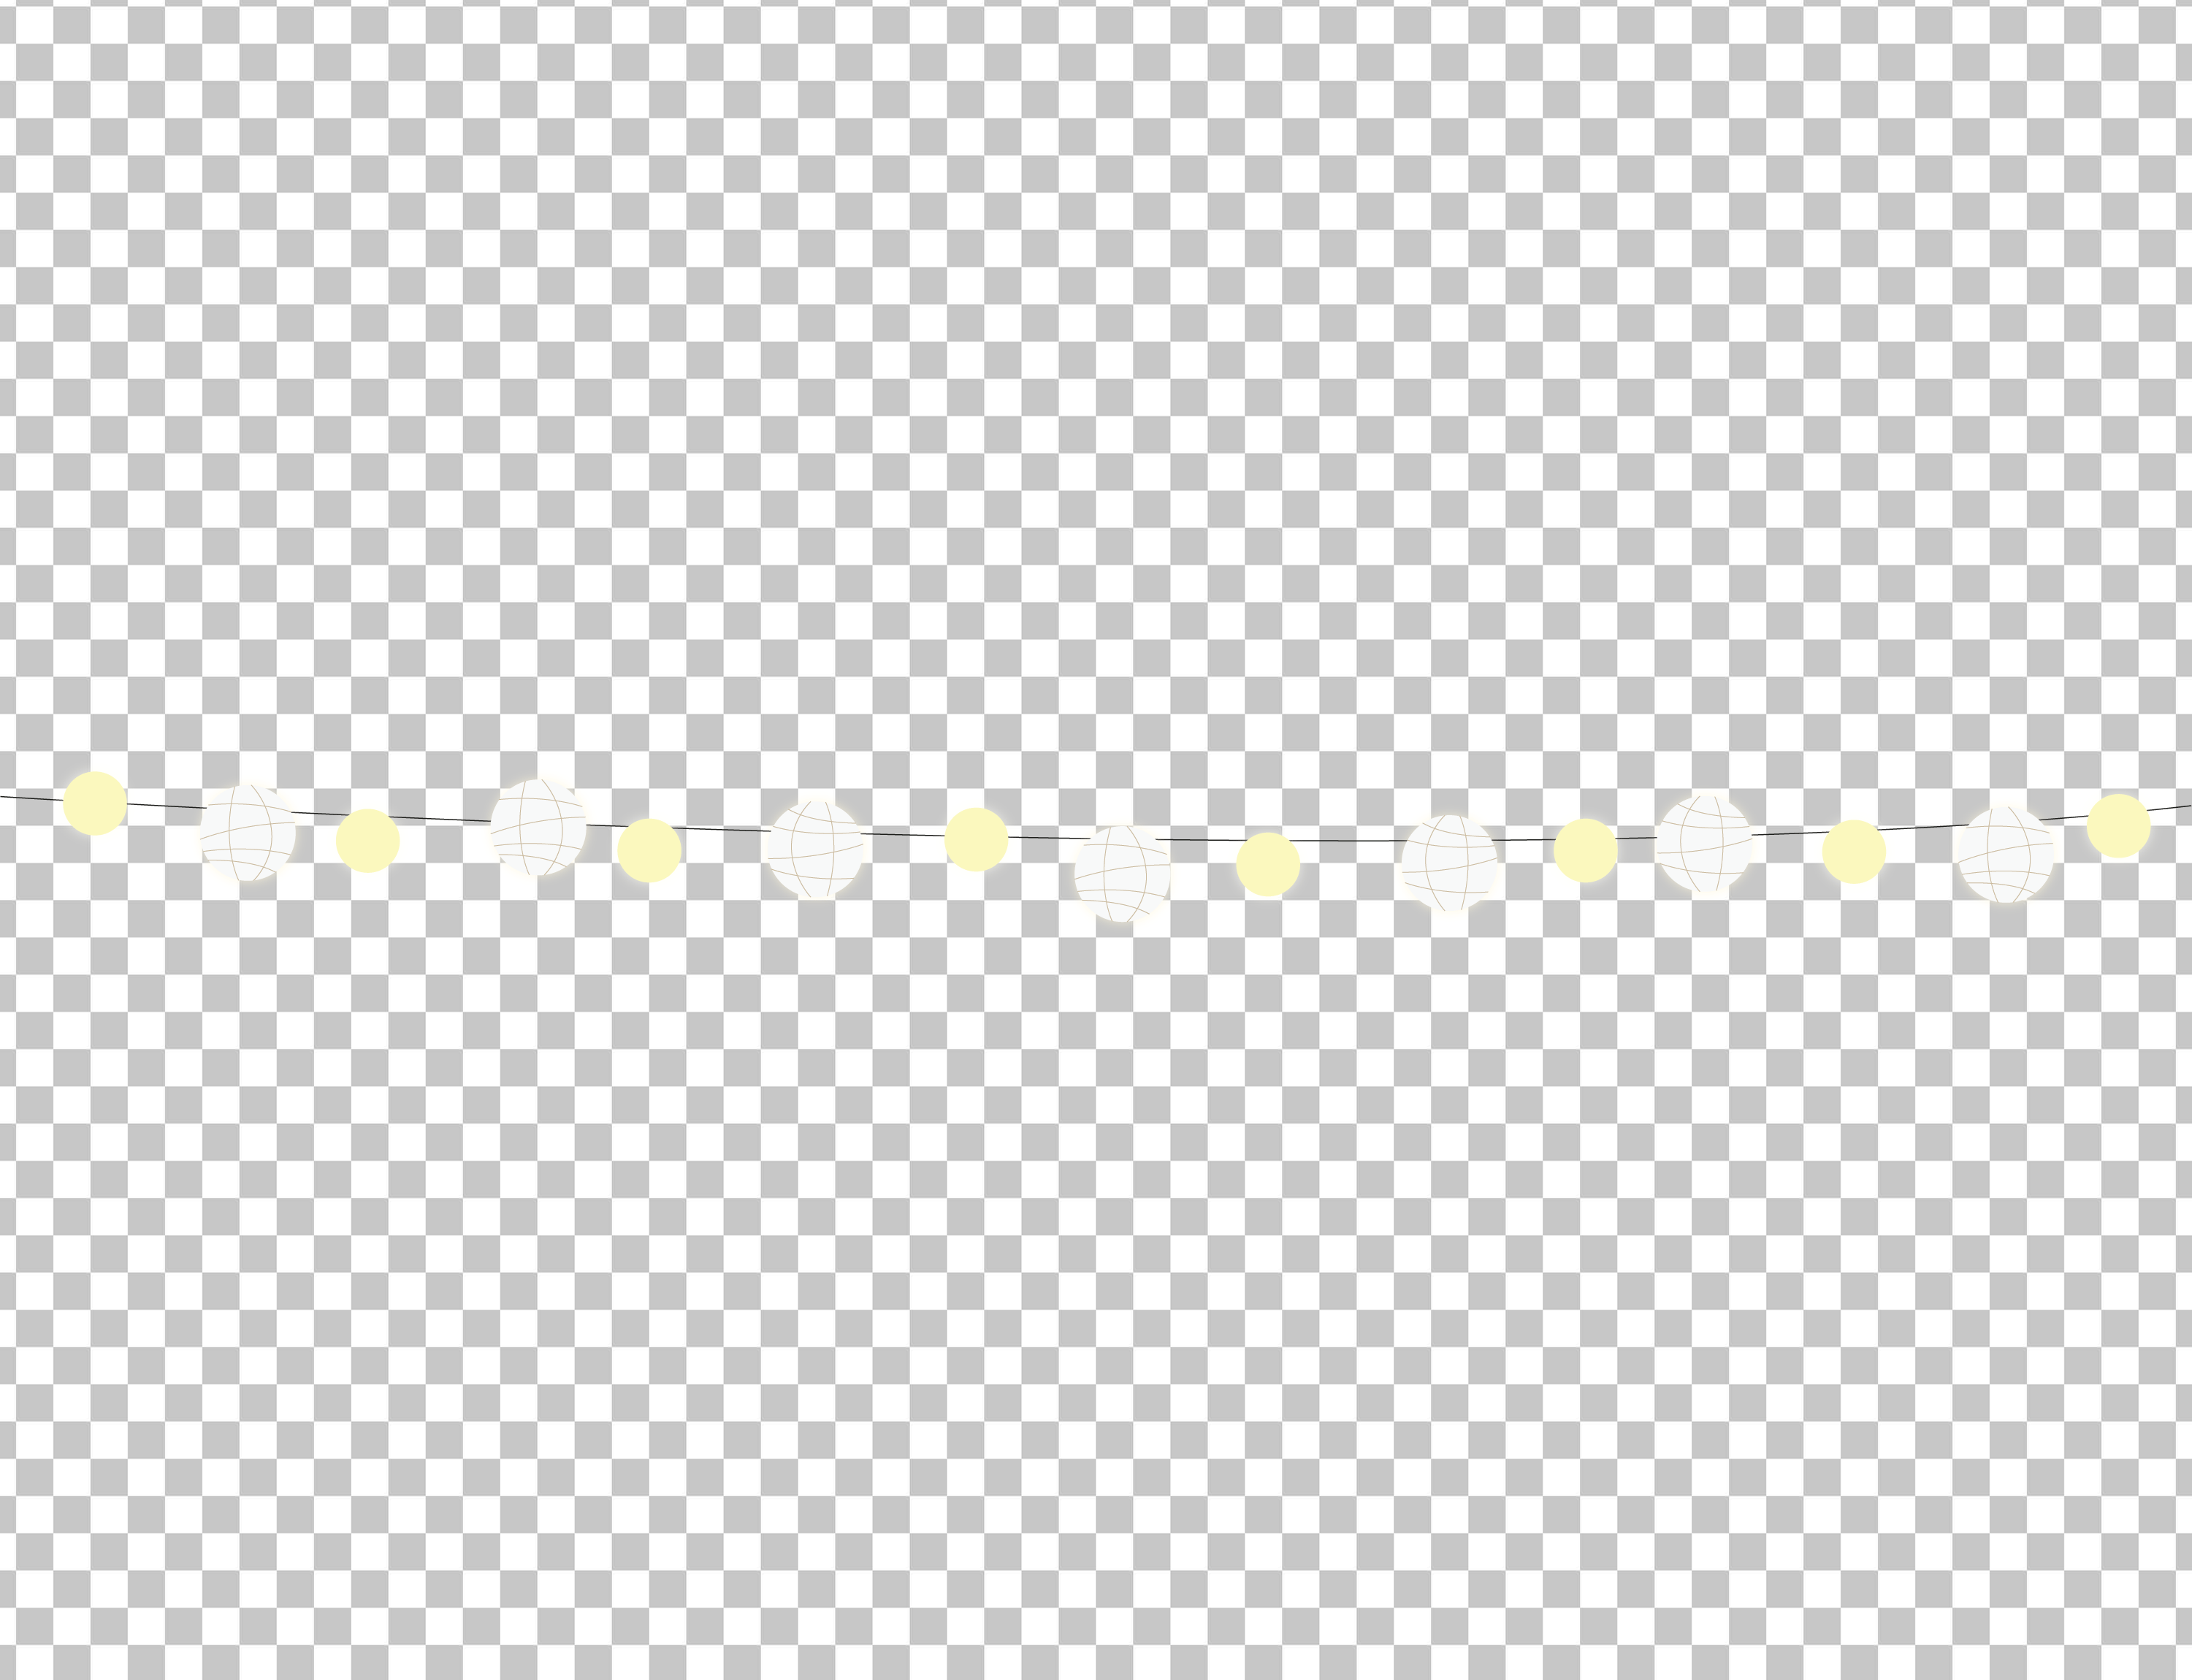 A row of white and yellow string lights on a transparent background.